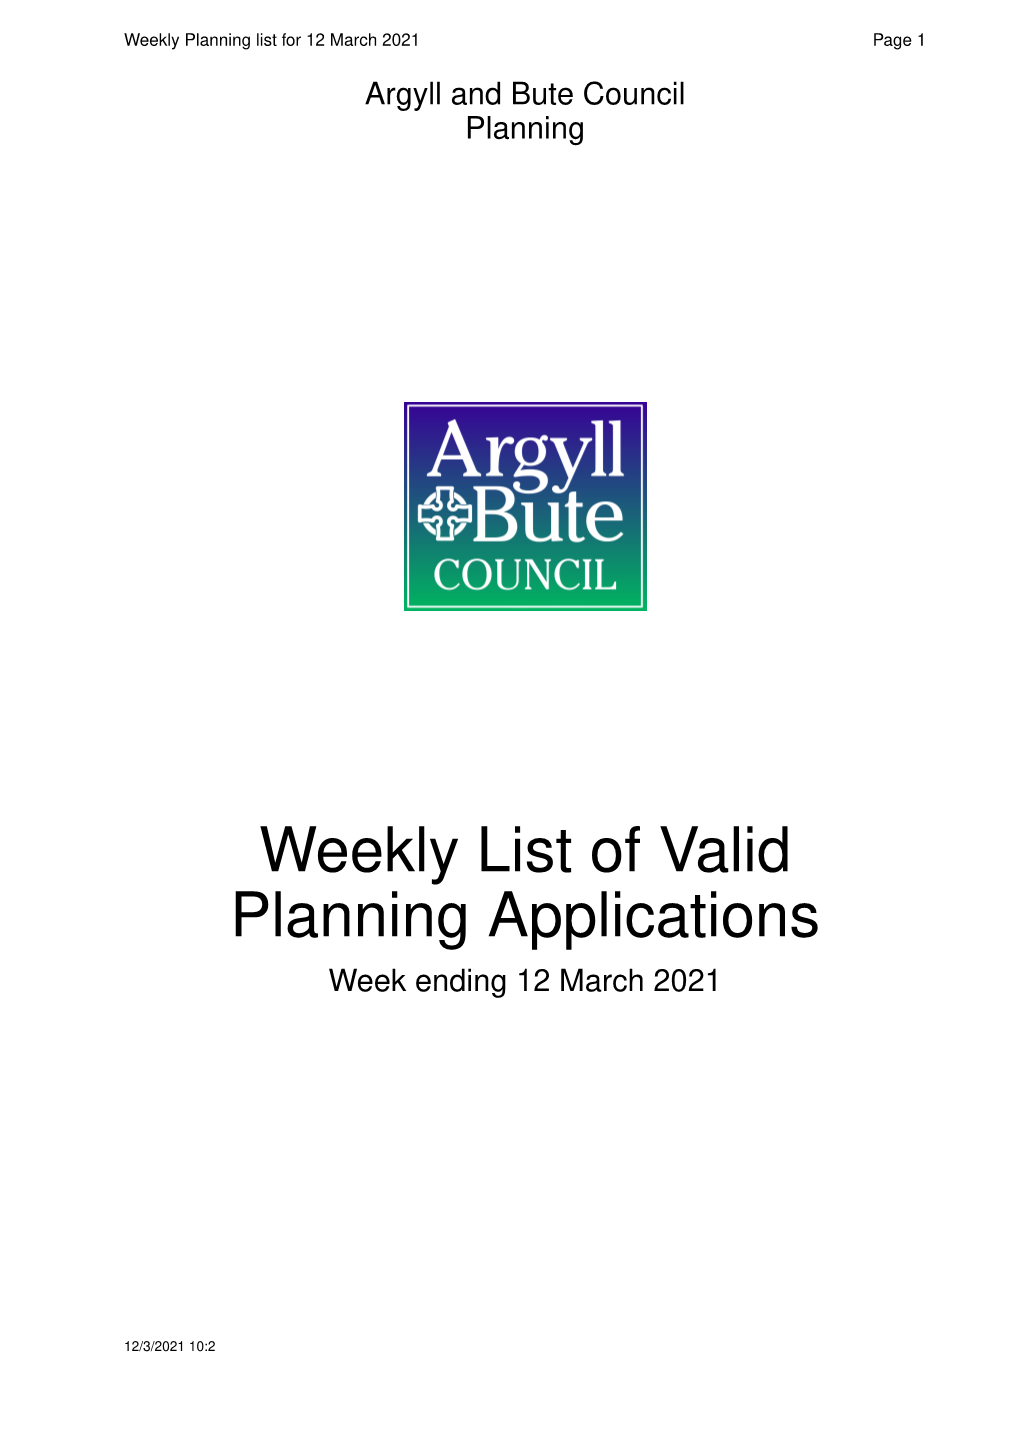 Weekly List of Valid Planning Applications 12Th March 2021.Pdf